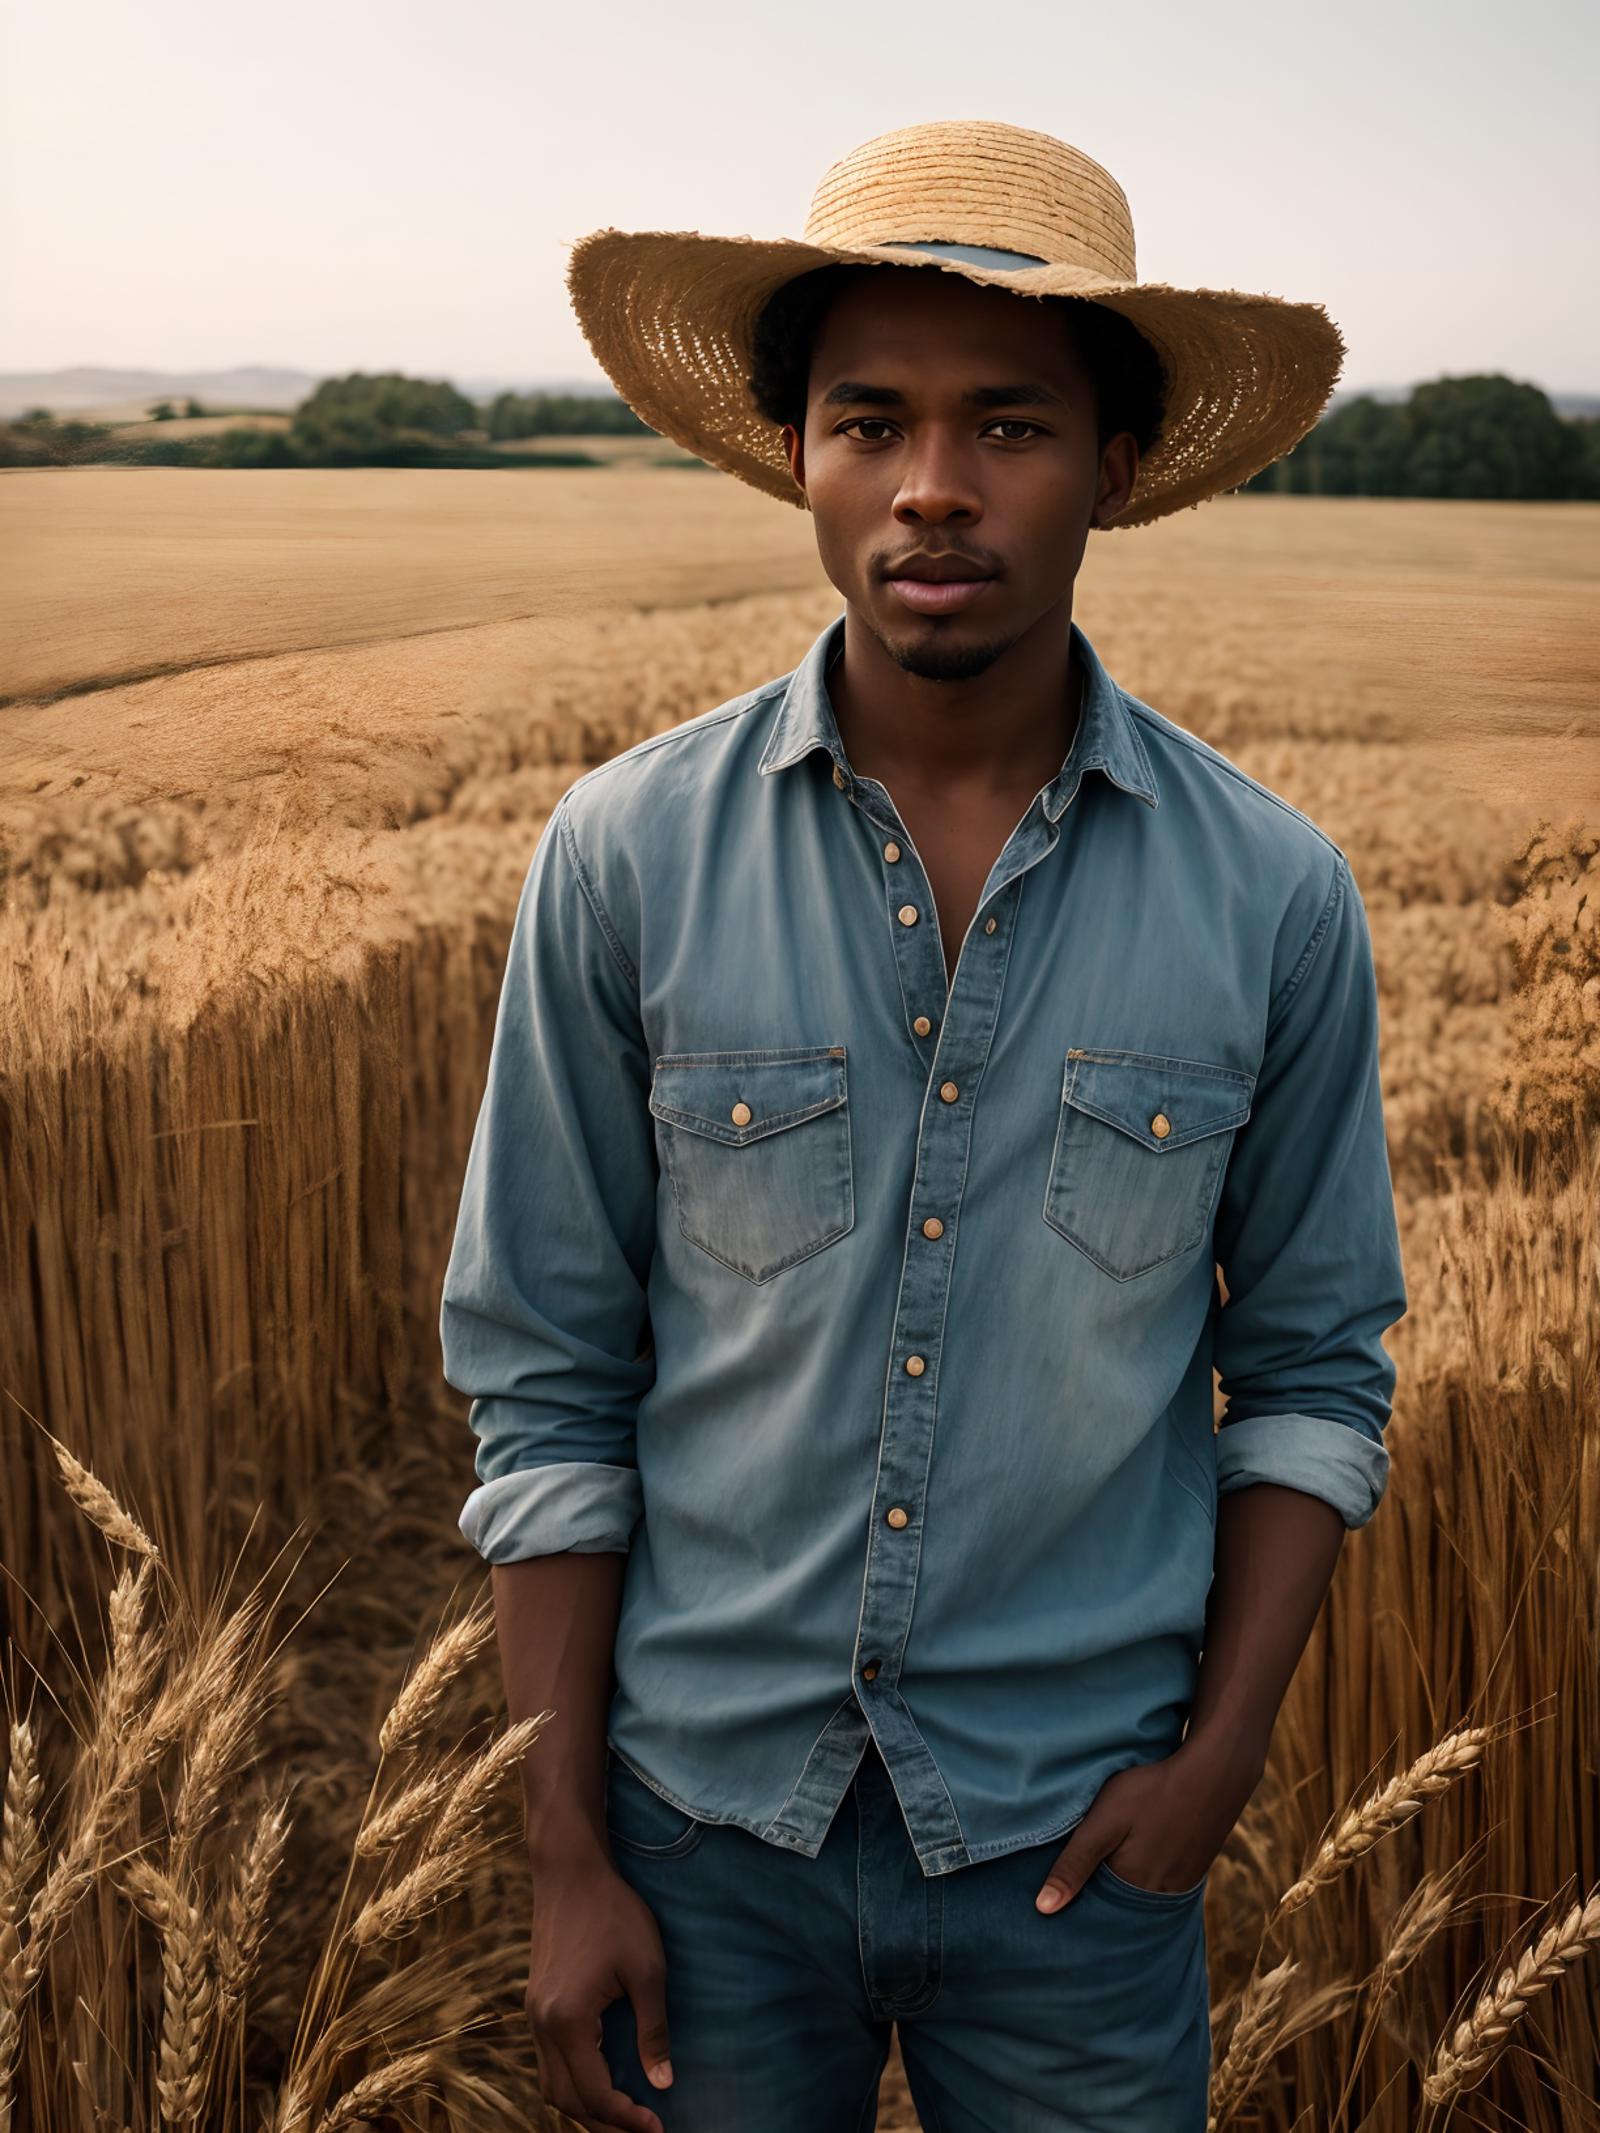 A young man in a blue shirt and straw hat poses in a wheat field.